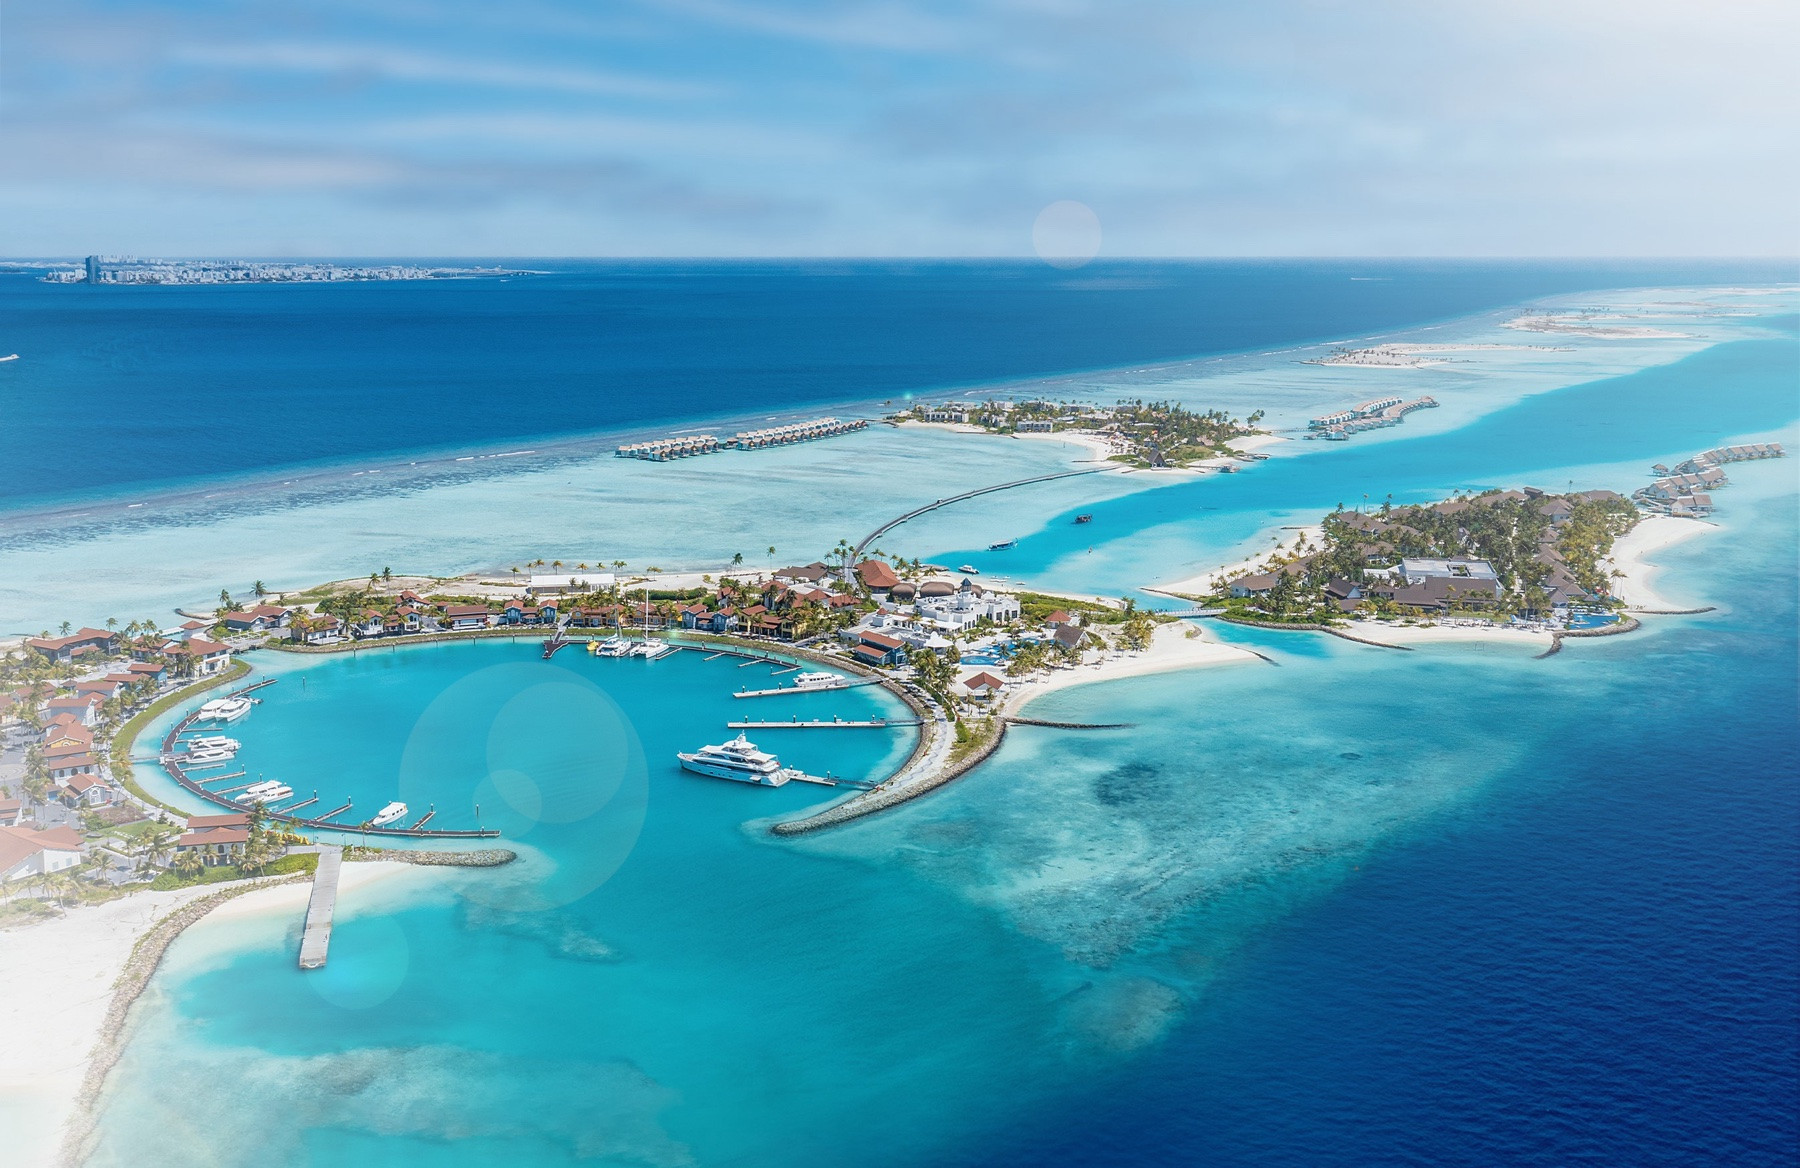 Crossroads Maldives Teams Up with Dhiraagu for Exclusive Benefits